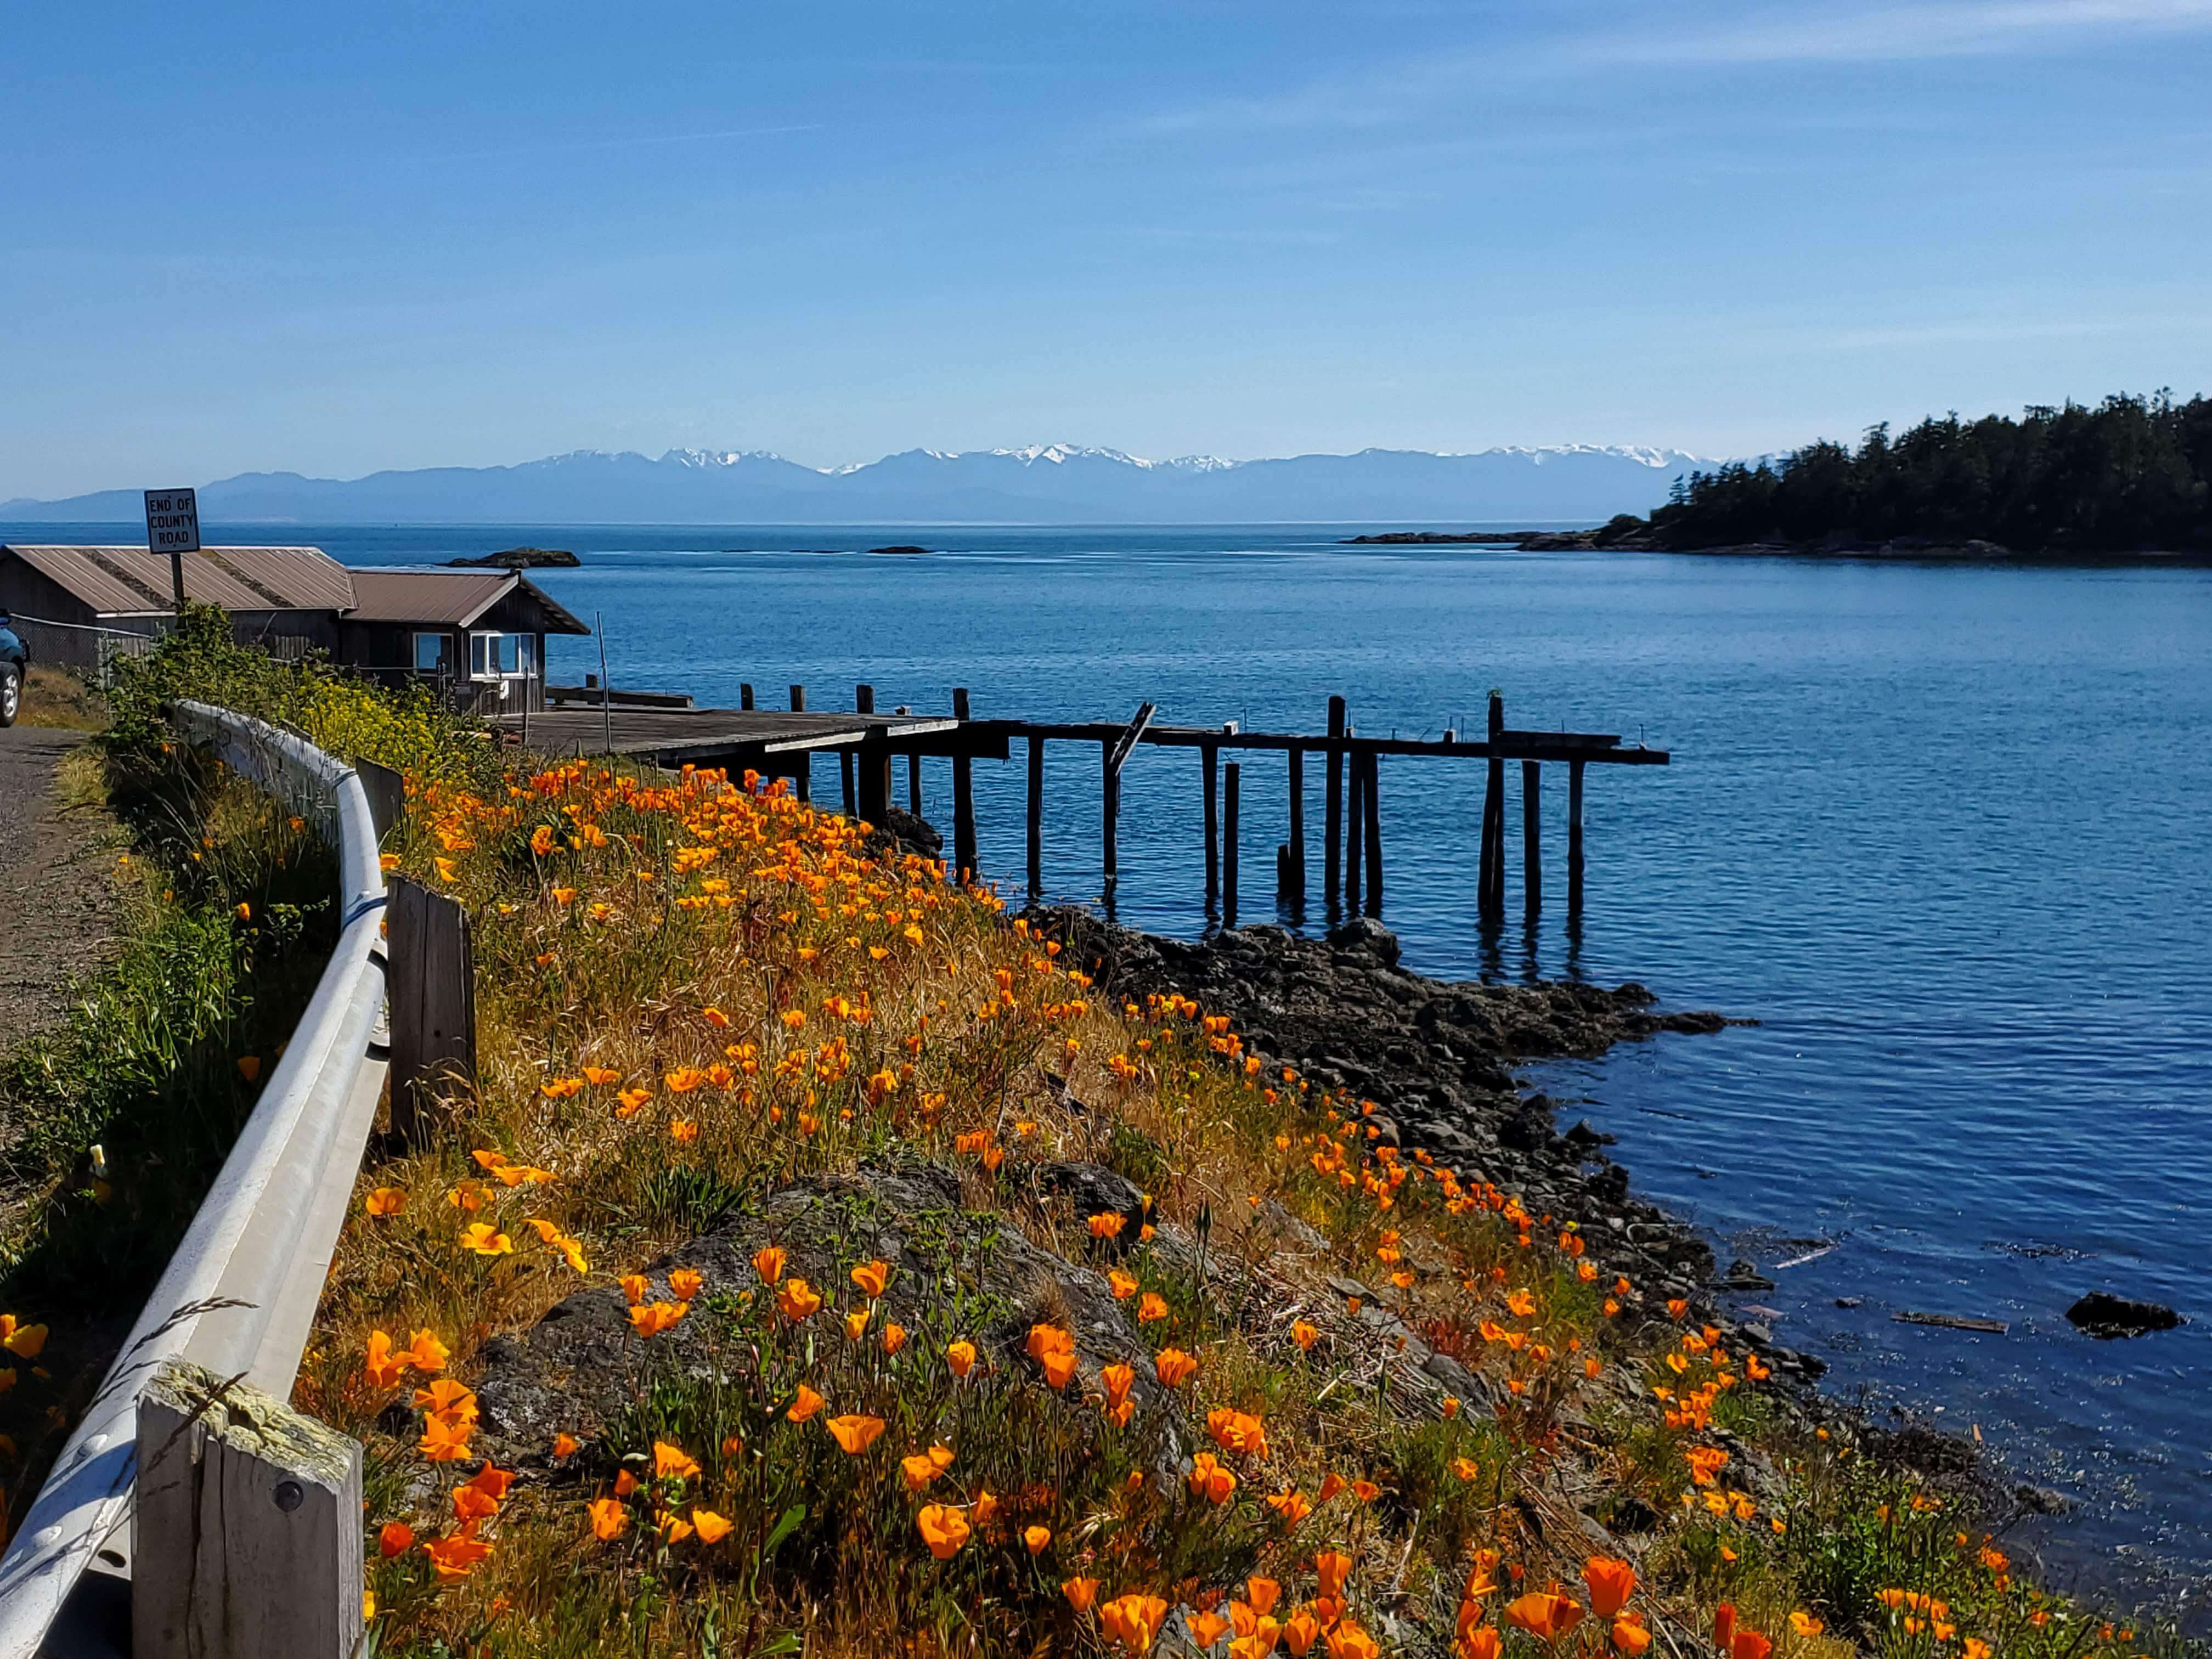 View of orange flowers, an abandoned dock, and the Olympic Mountains in the distance as seen from Richardson Road on Lopez Island